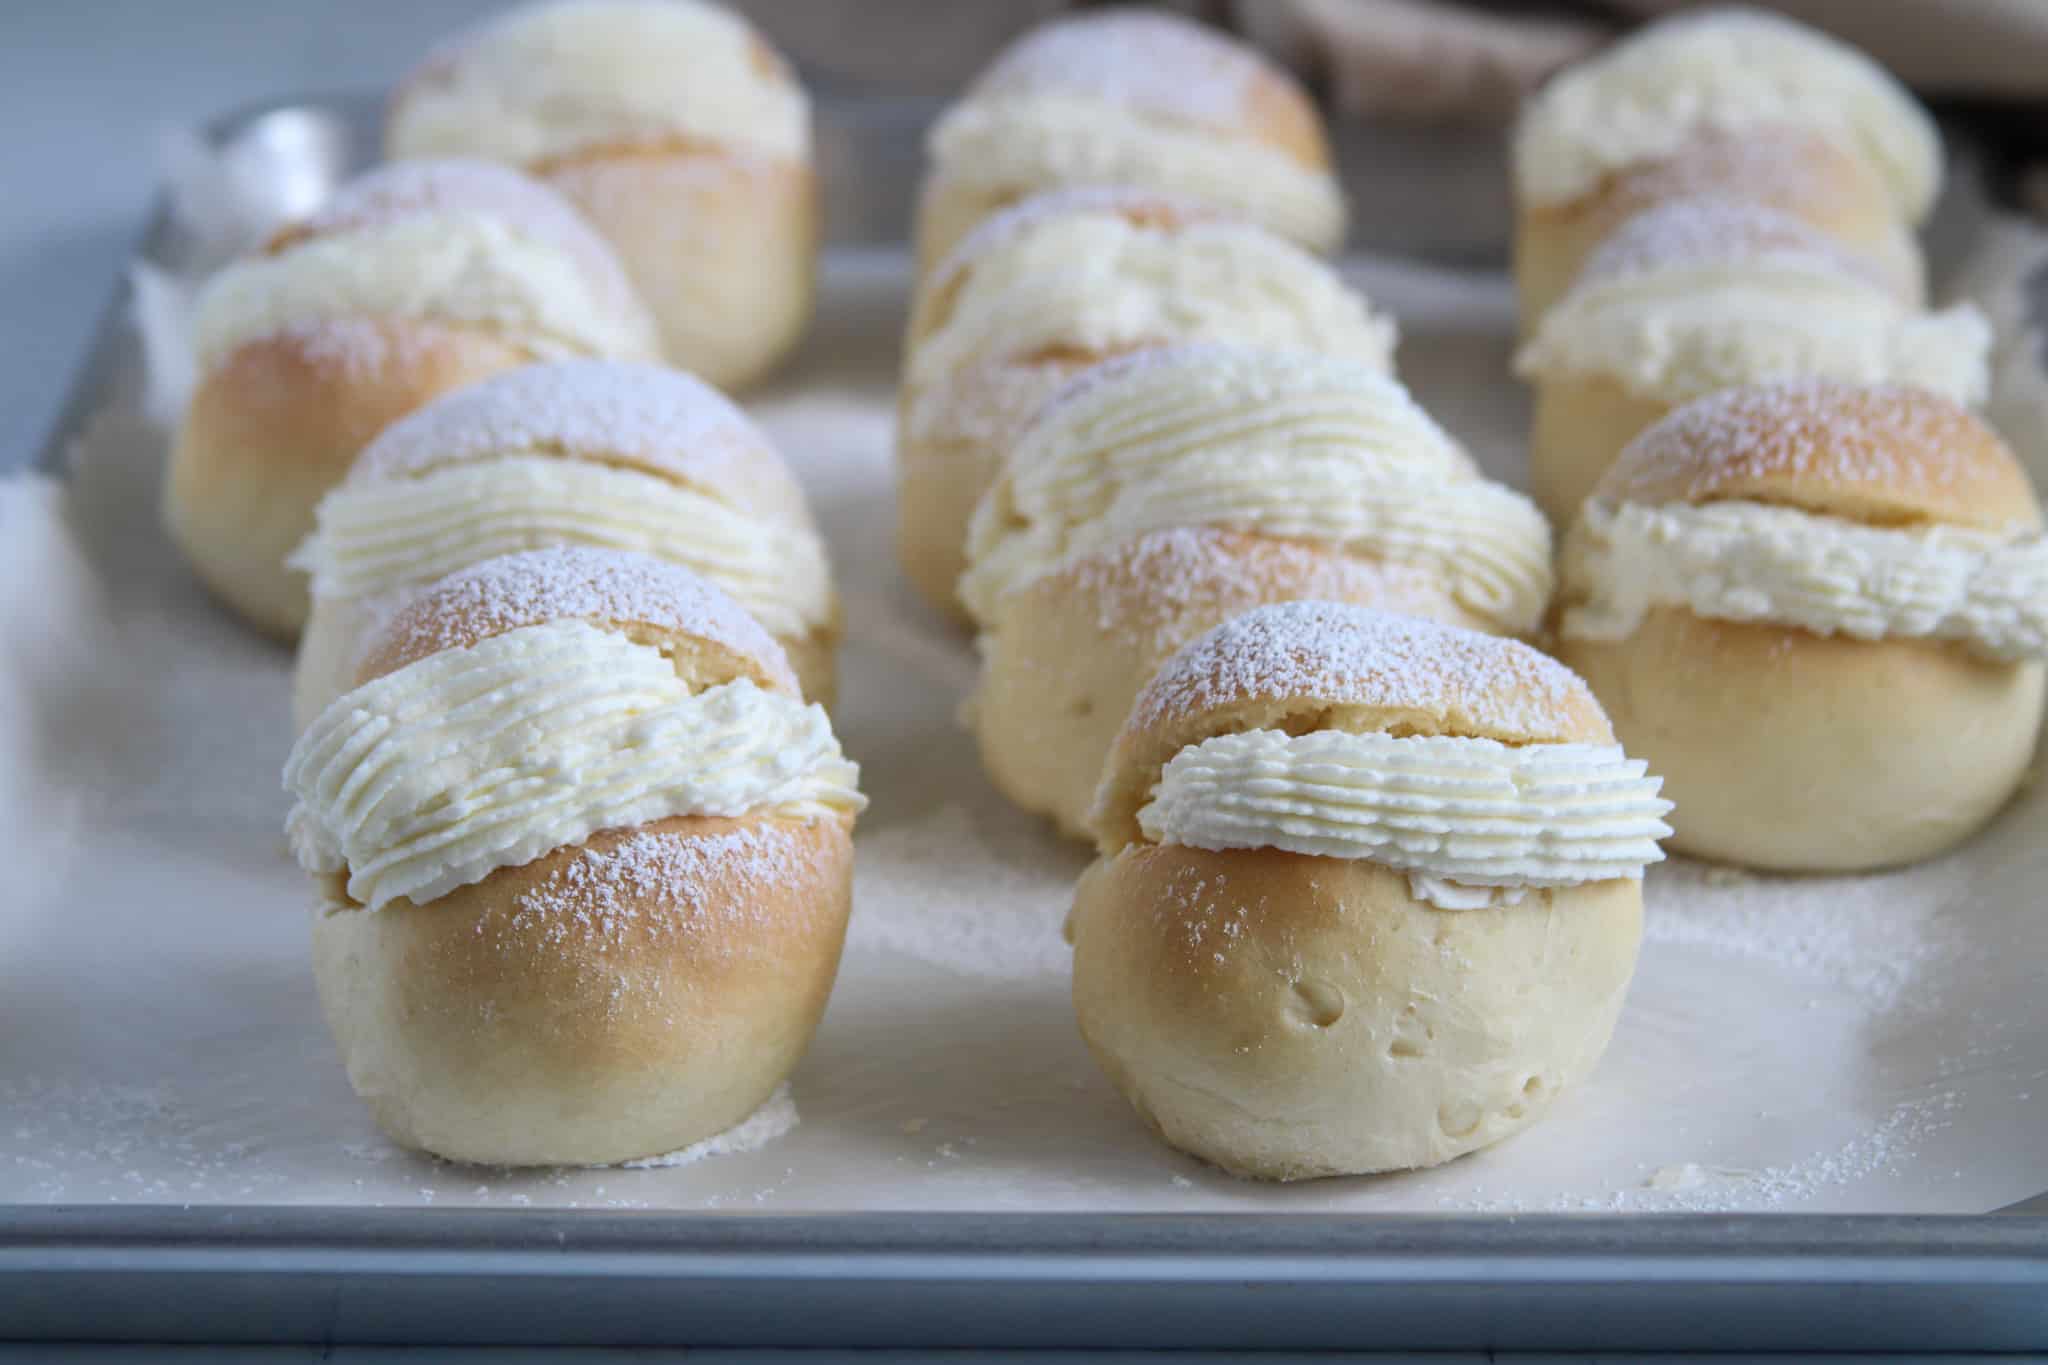 The cream buns on a baking sheet, dusted with powdered sugar.